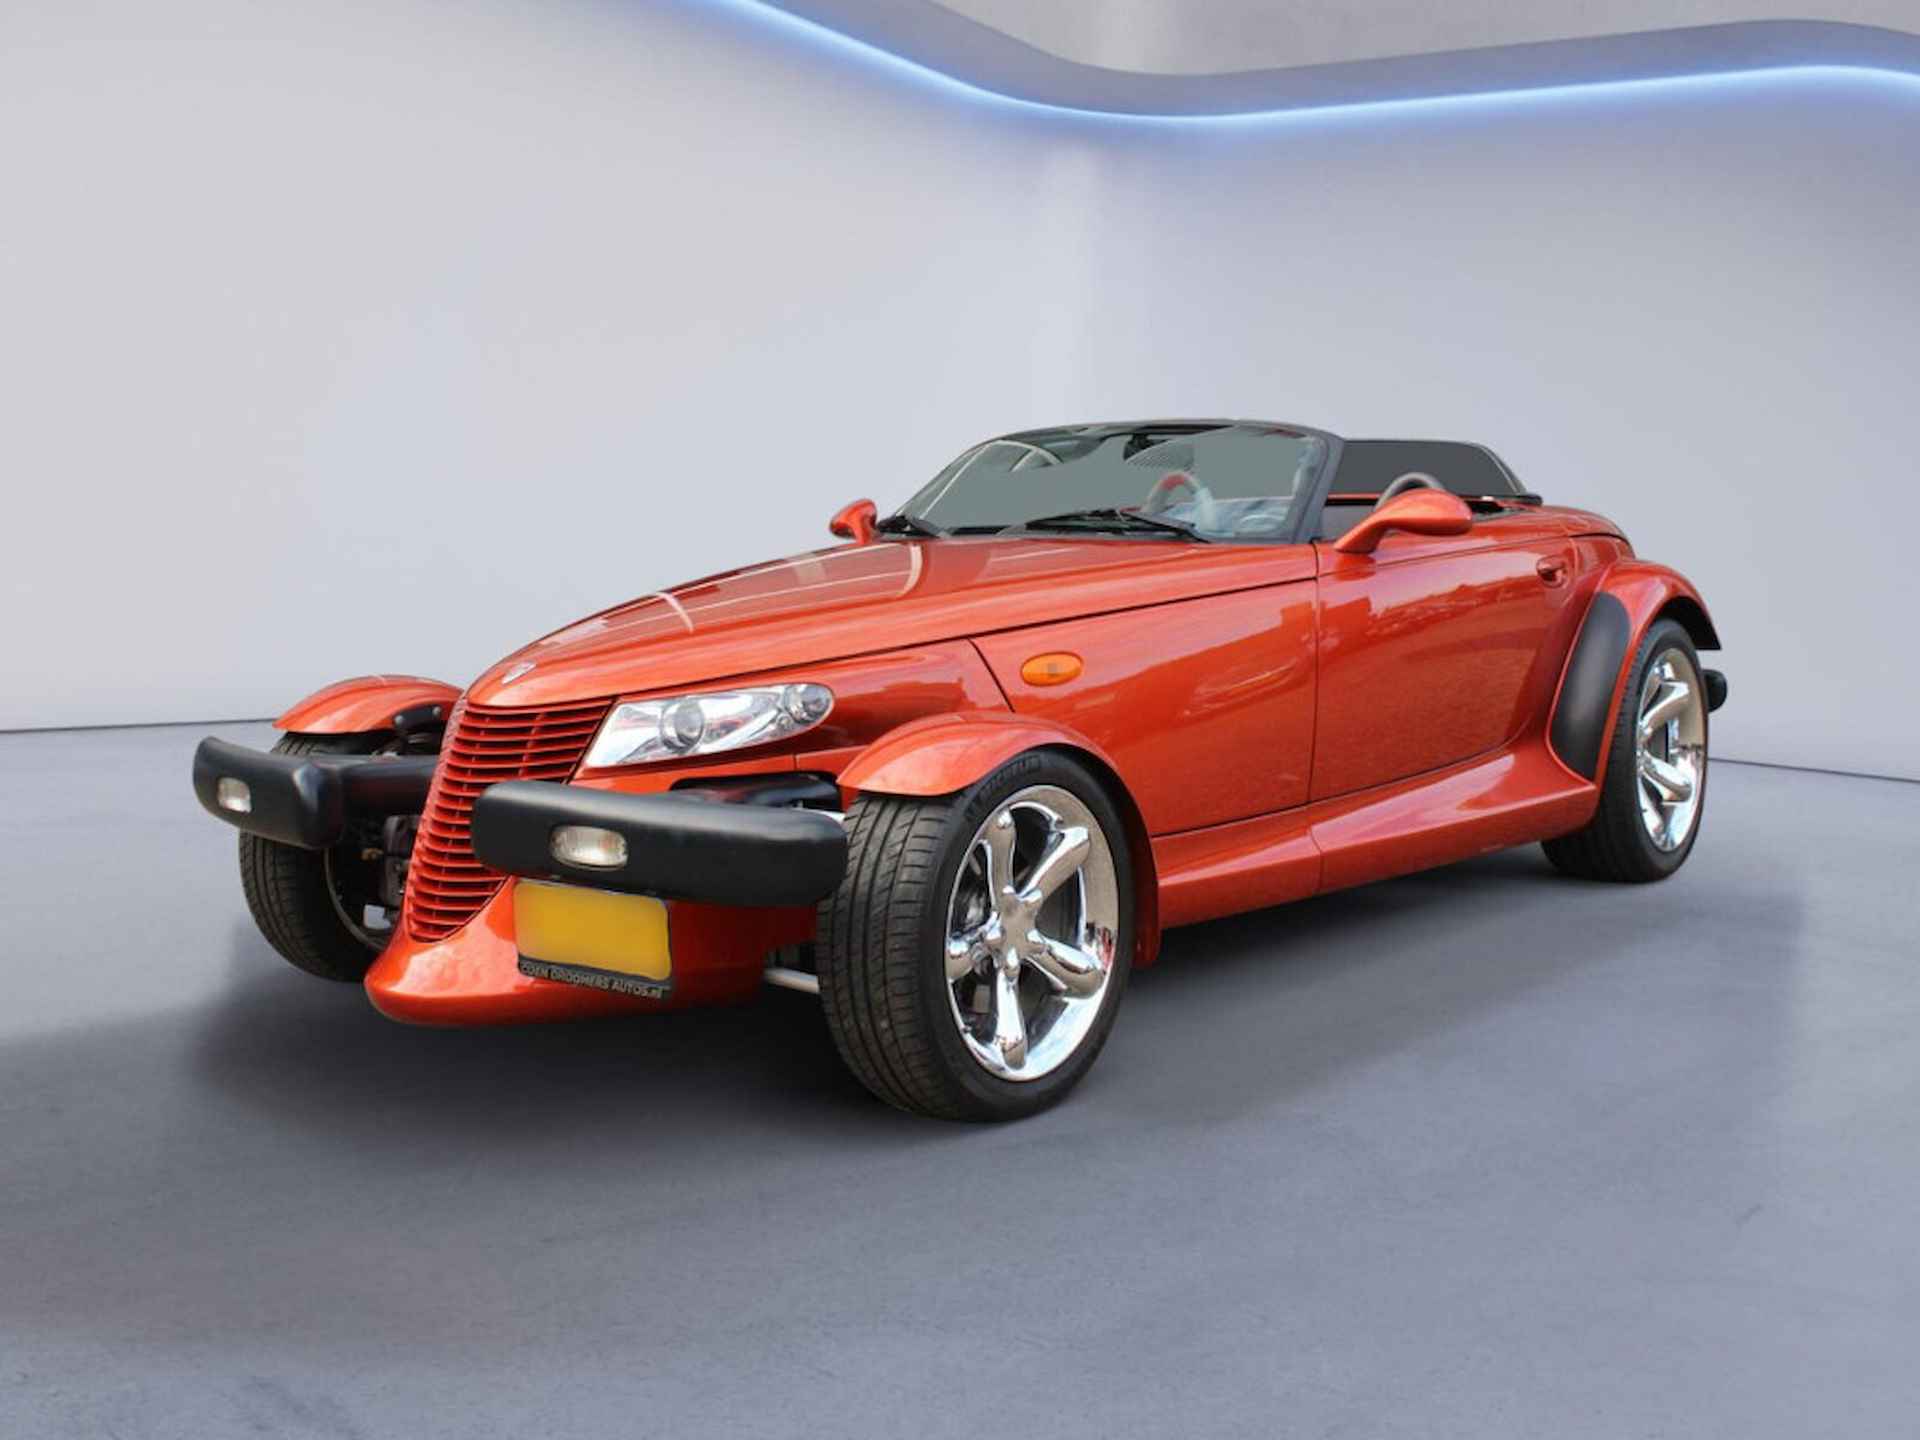 Plymouth Prowler Automaat 3.5i-V6 Youngtimer Nieuwe Cabriokap, Wind scherm Auto is in Concoursstaat. - 1/17